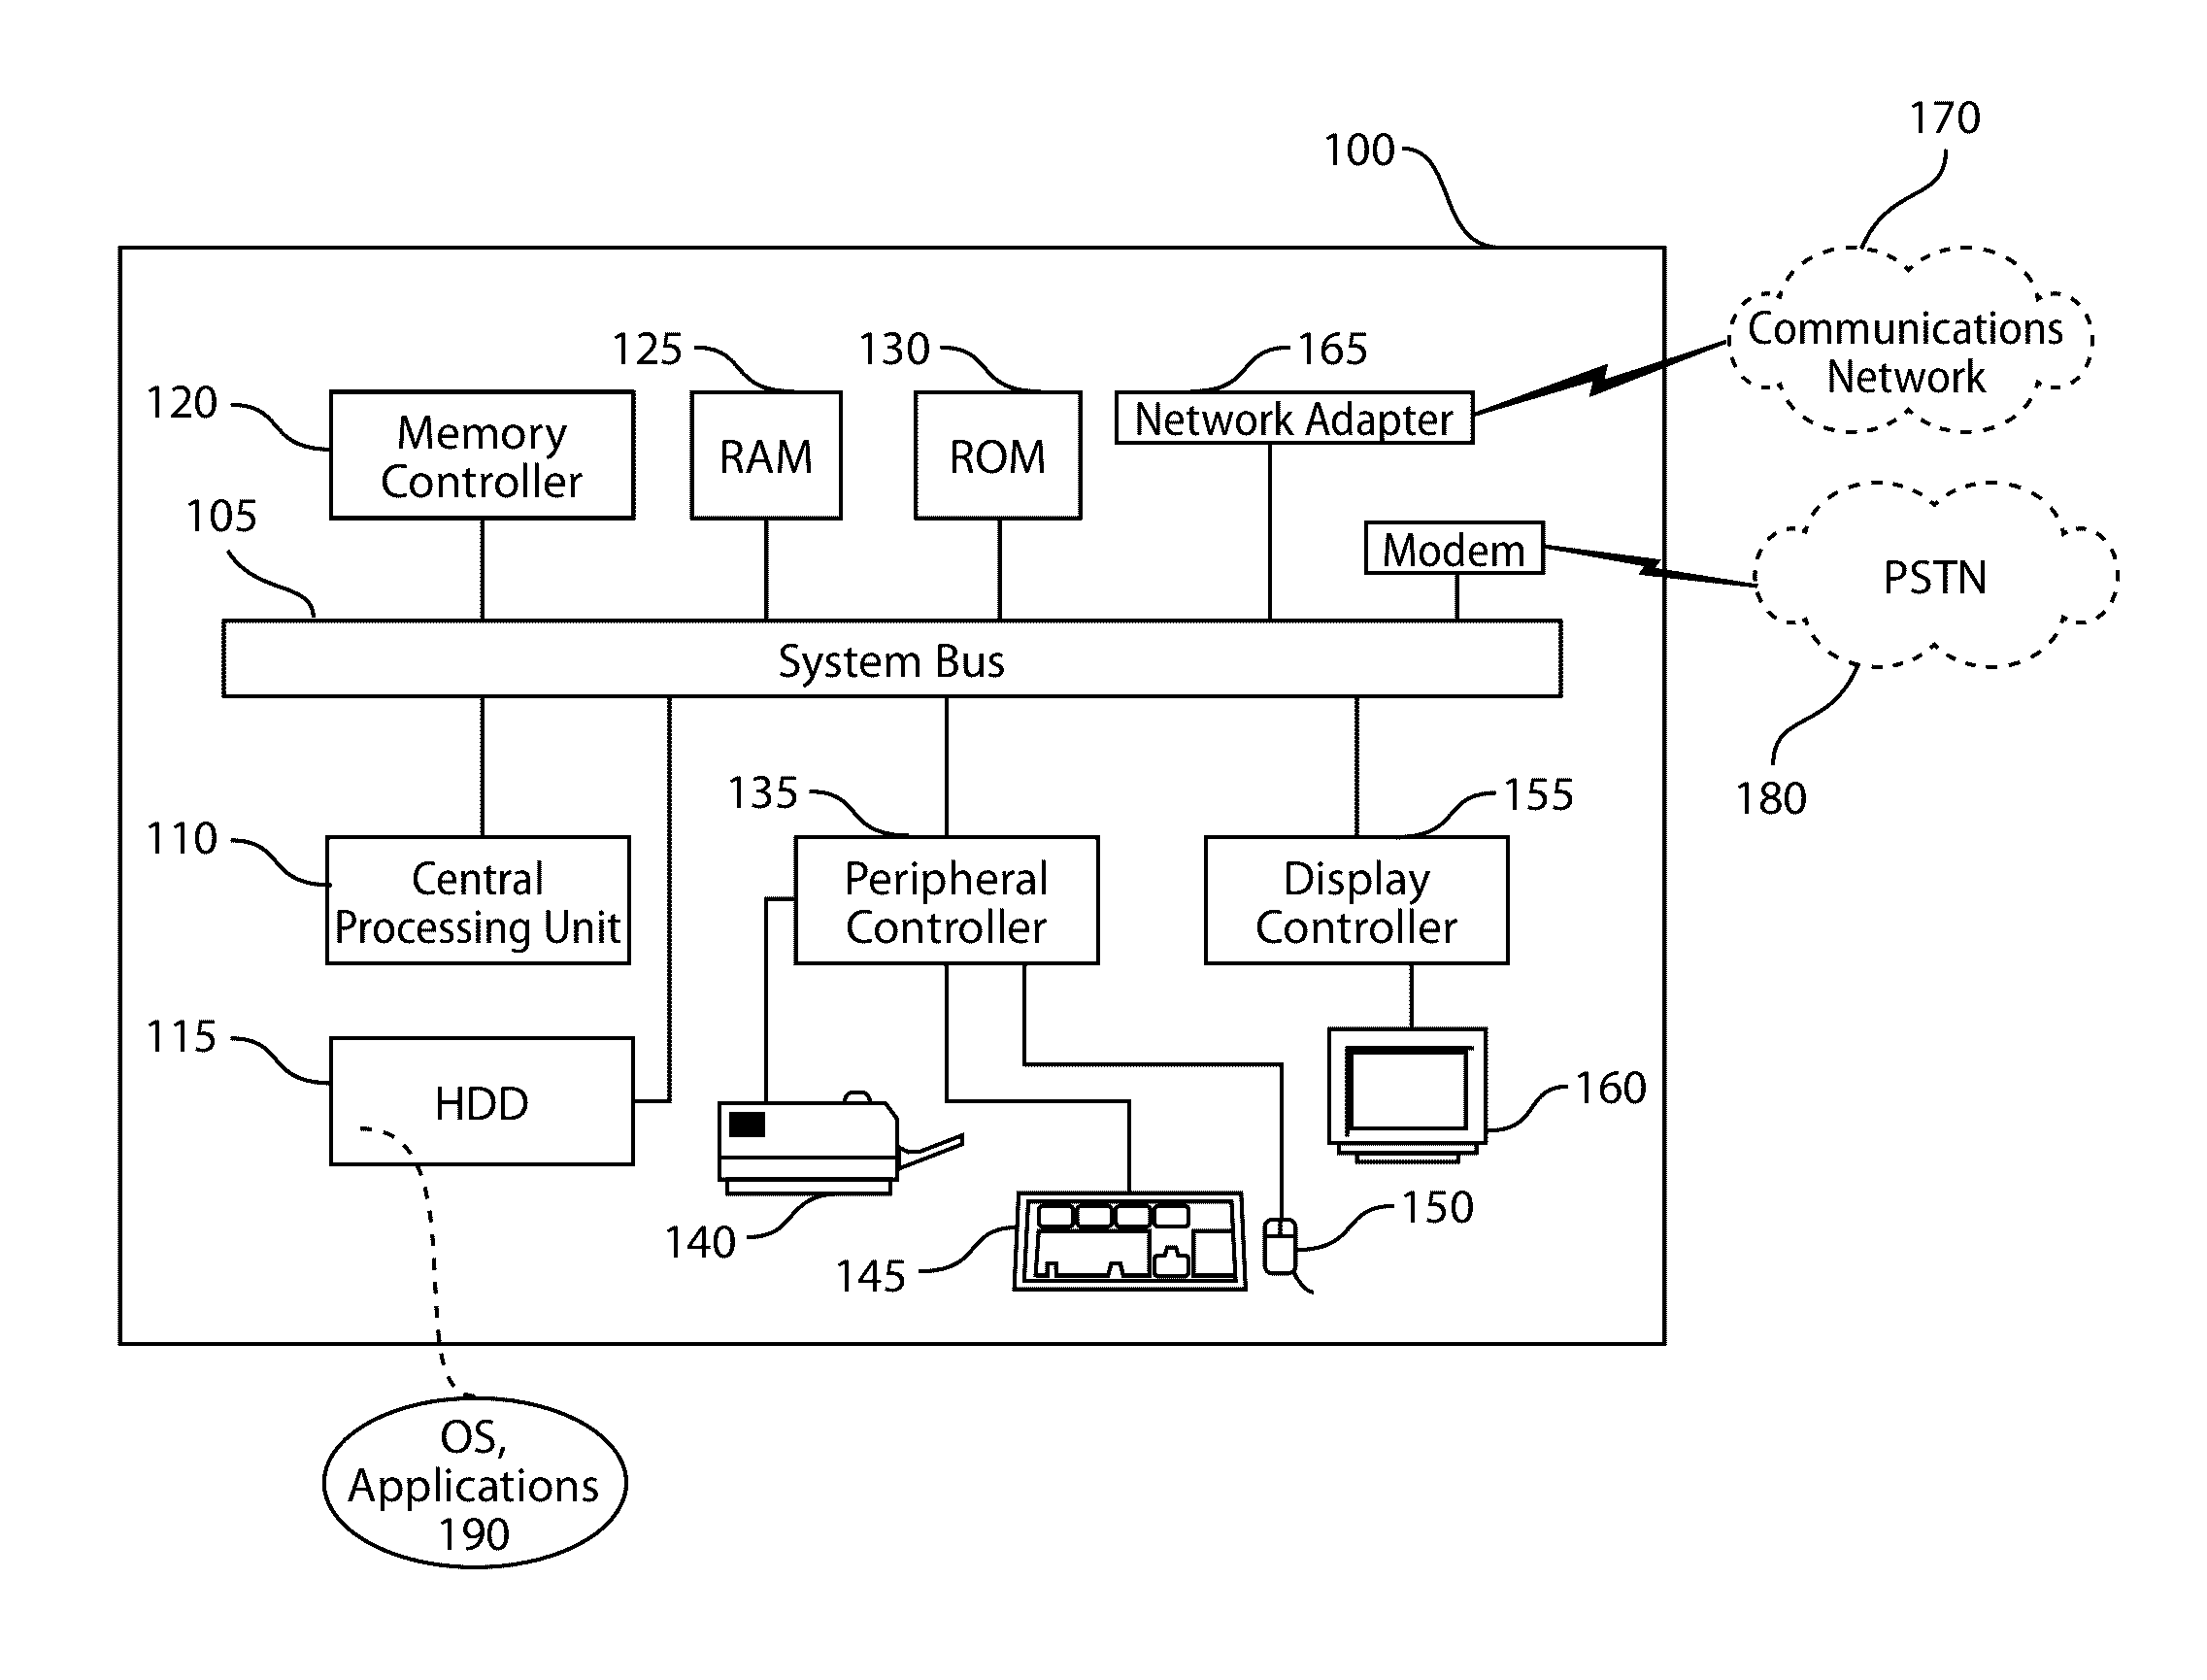 Computer-based system for use in providing advisory services